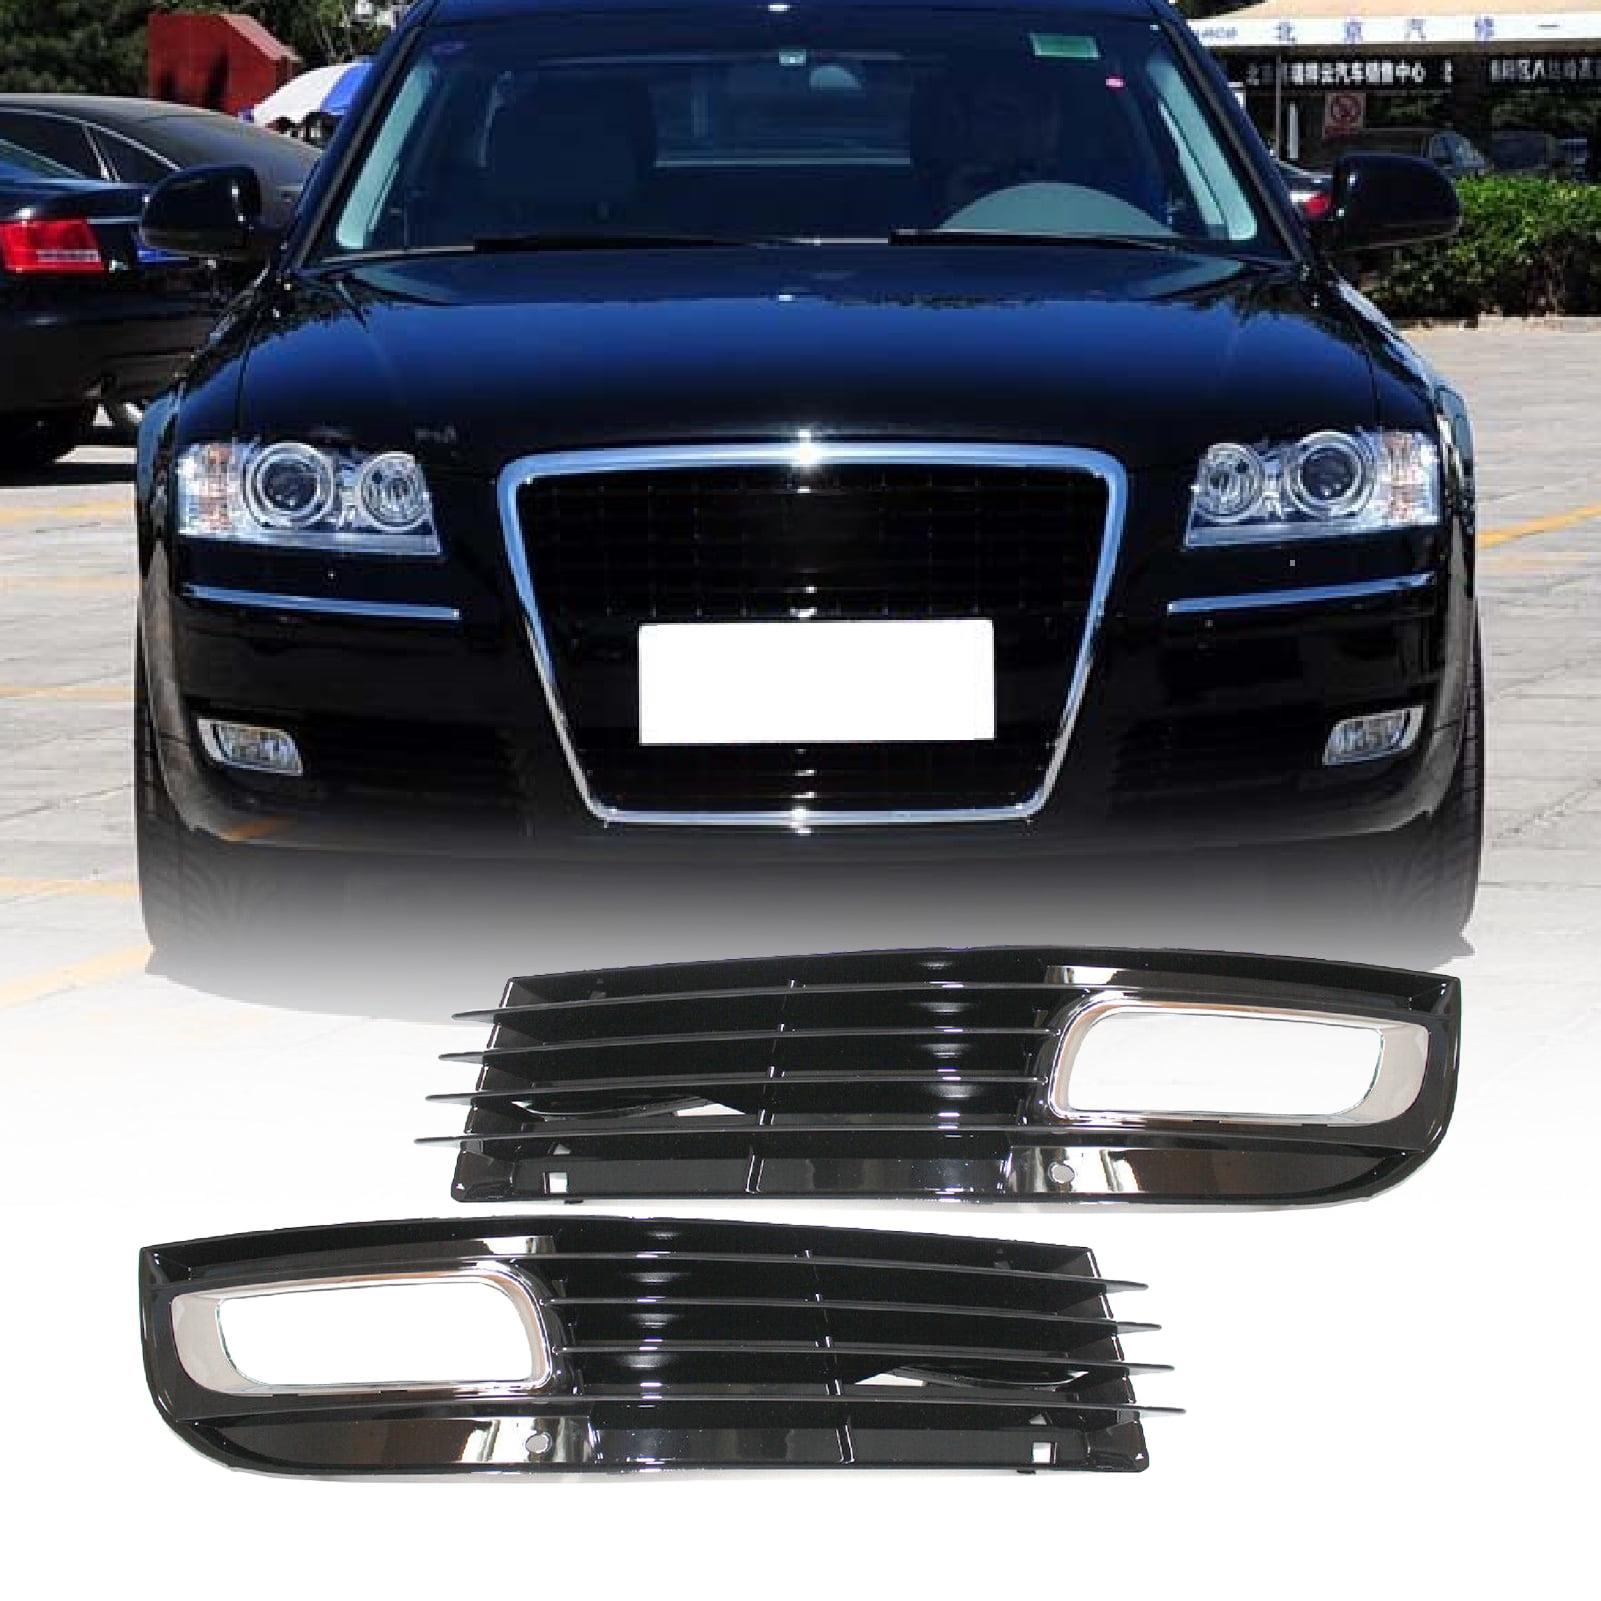 LH AUDI A8 2009 left front bumper lower grille with fog lights hole